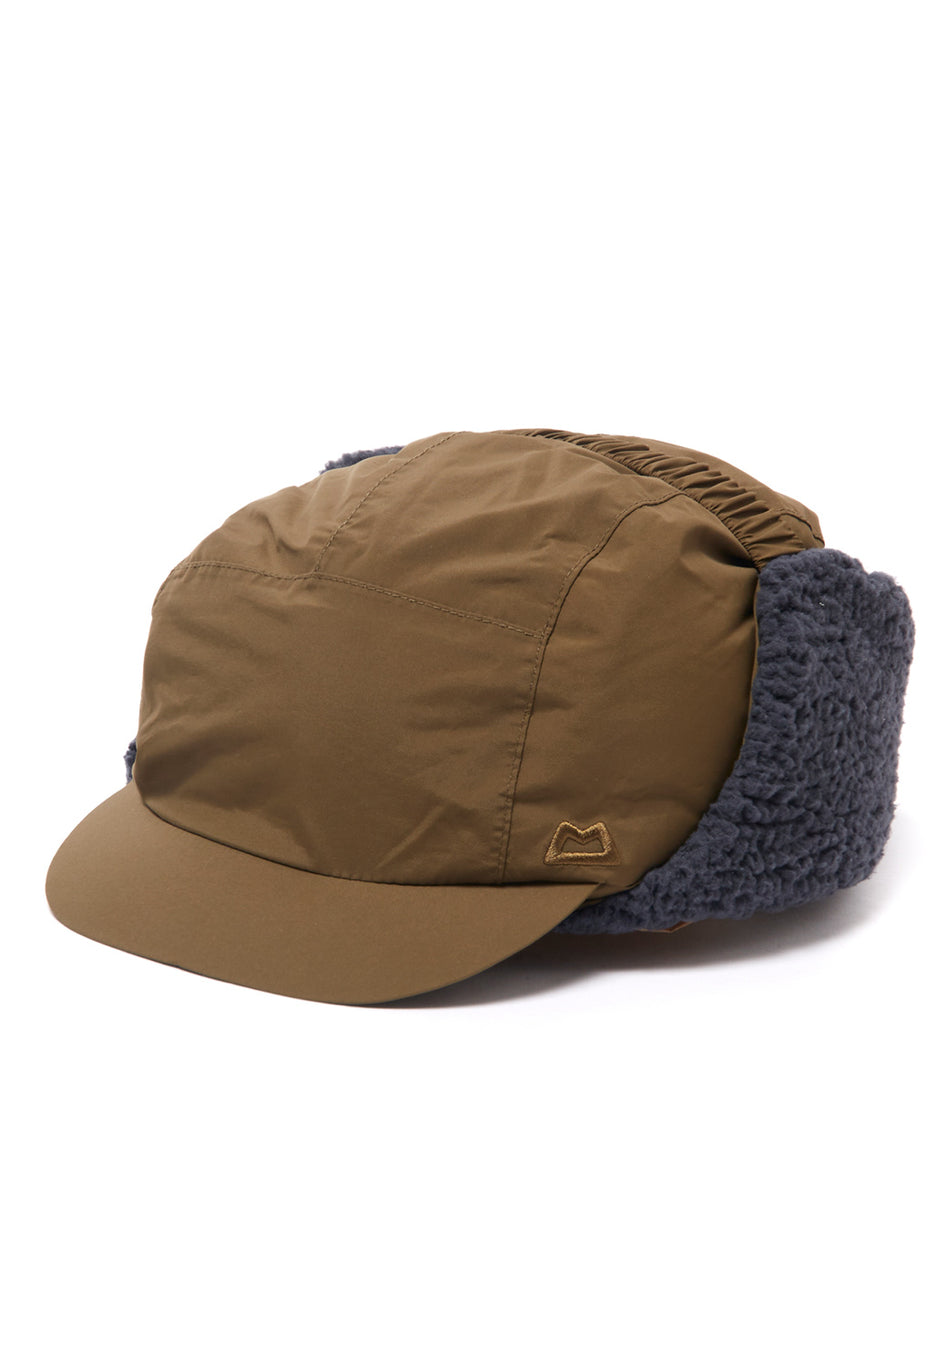 Men's hats, caps and beanies - Outsiders Store – Outsiders Store UK